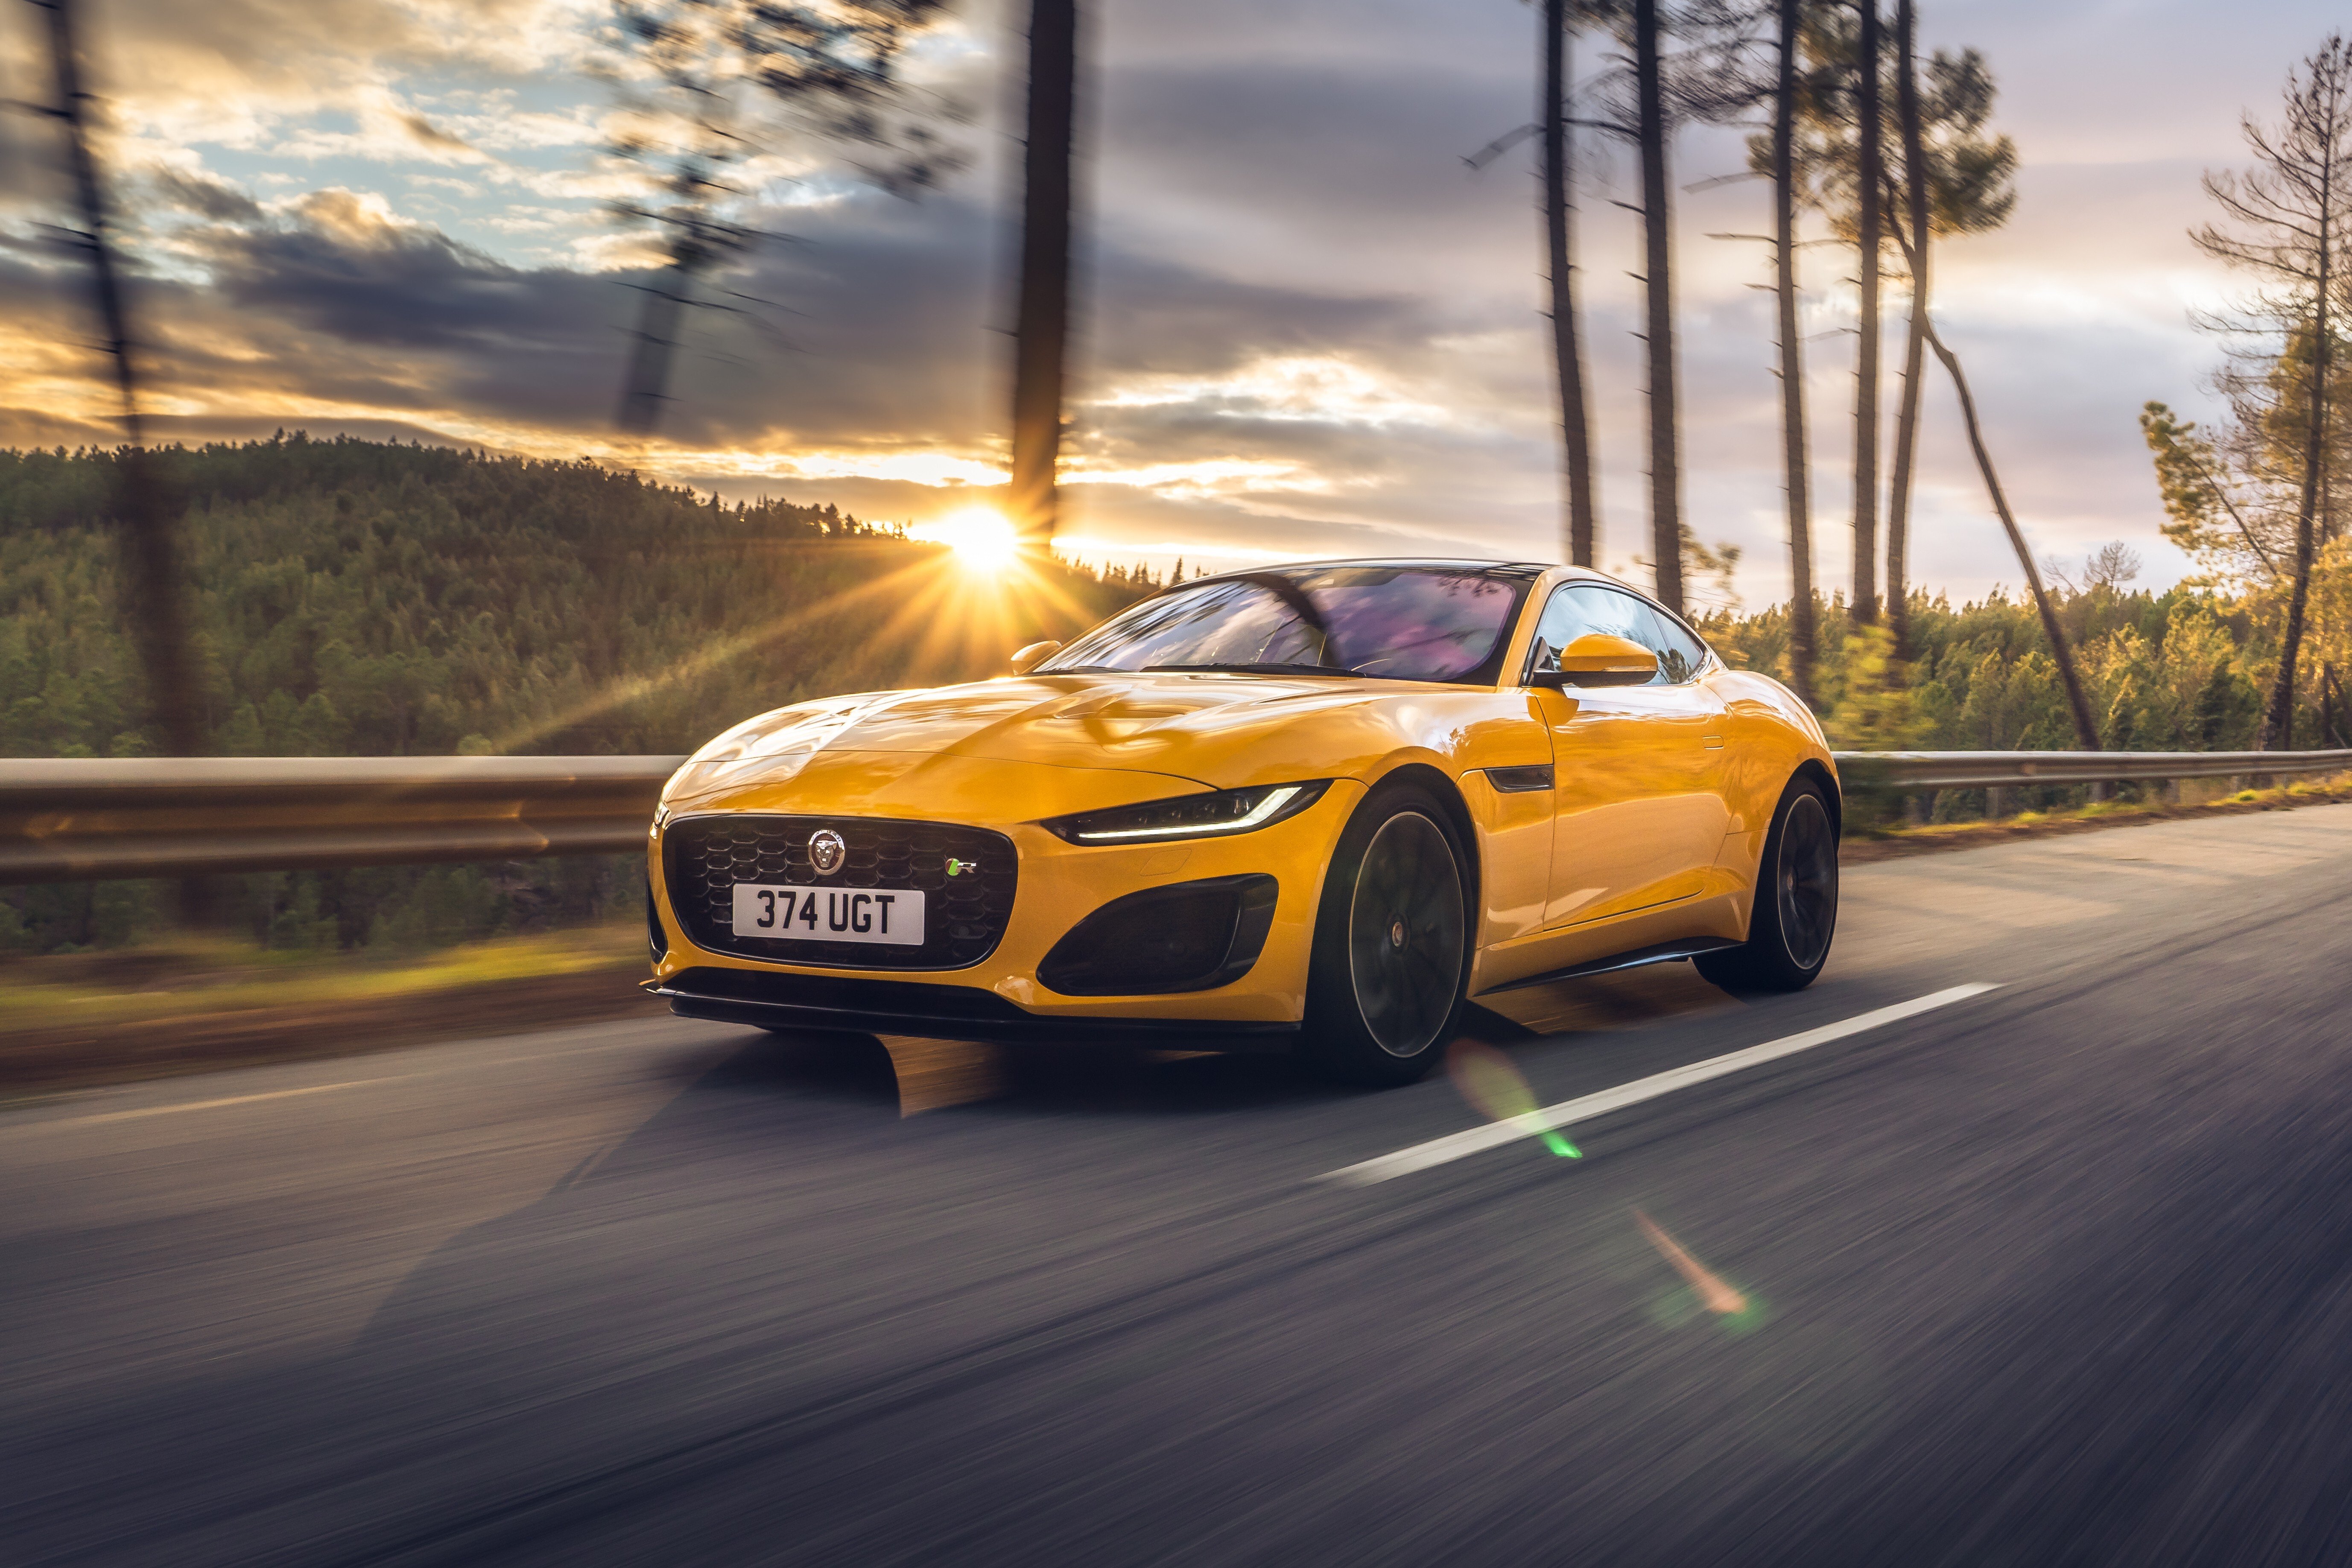 The year 2020 has seen the release of two exciting supercar models: the latest F-Type from Jaguar, seen here, and the SF90 Spider, a topless model of the SF90 Stradale. Photo: Jaguar